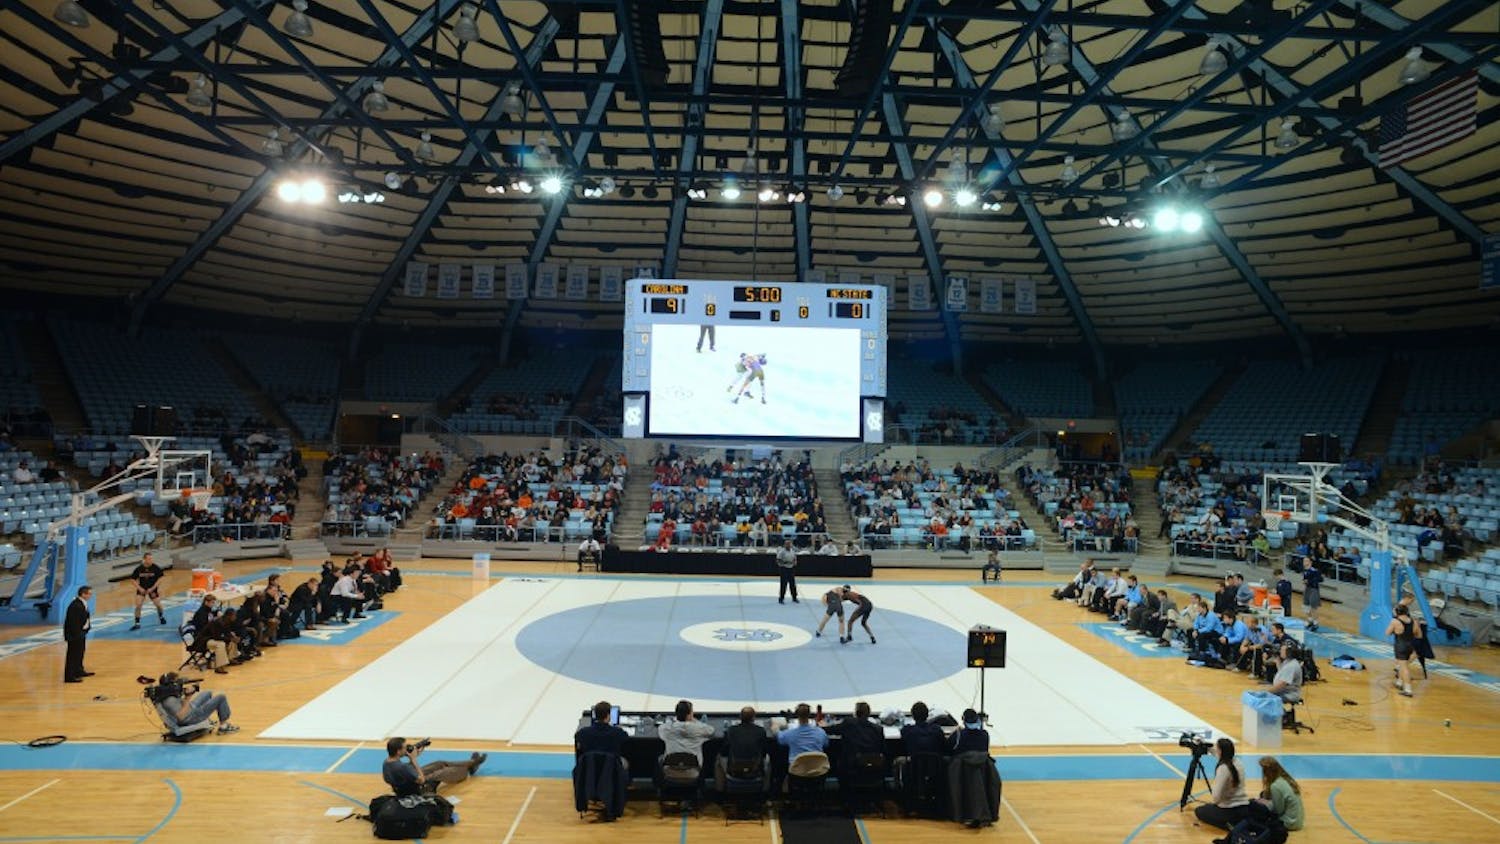 The UNC wrestling team competes in a match against N.C. State in Carmichael Arena on Feb. 1, 2023.&nbsp;